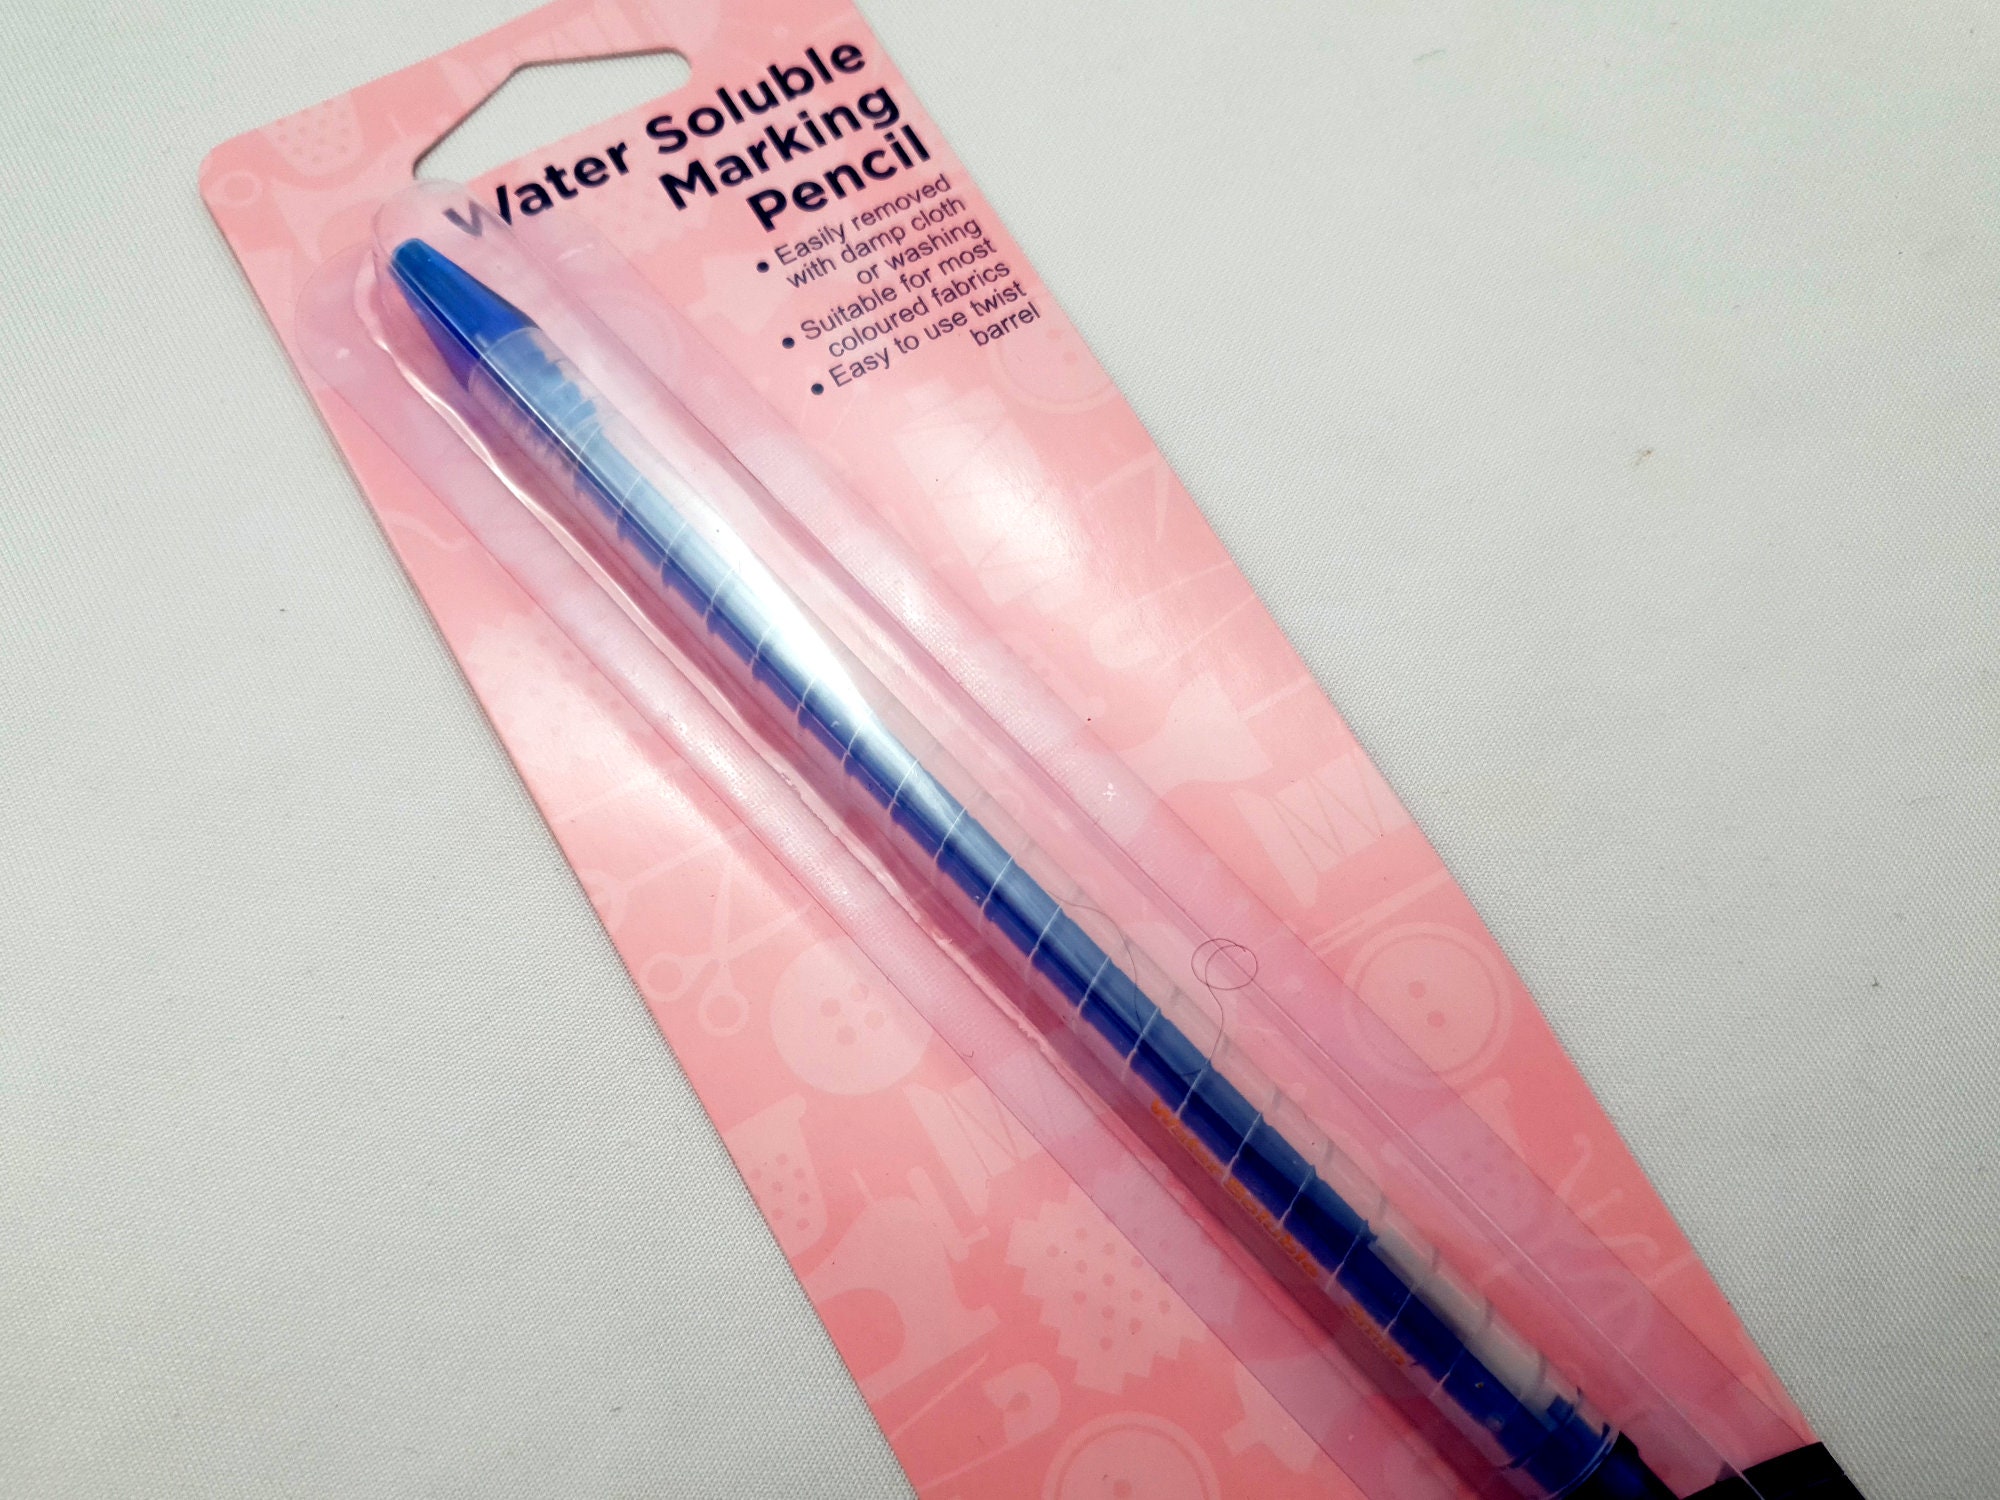 Vanishing Fabric Markers Water Erasable Pens 1/2/5 Material Marker Pens  Sewing 